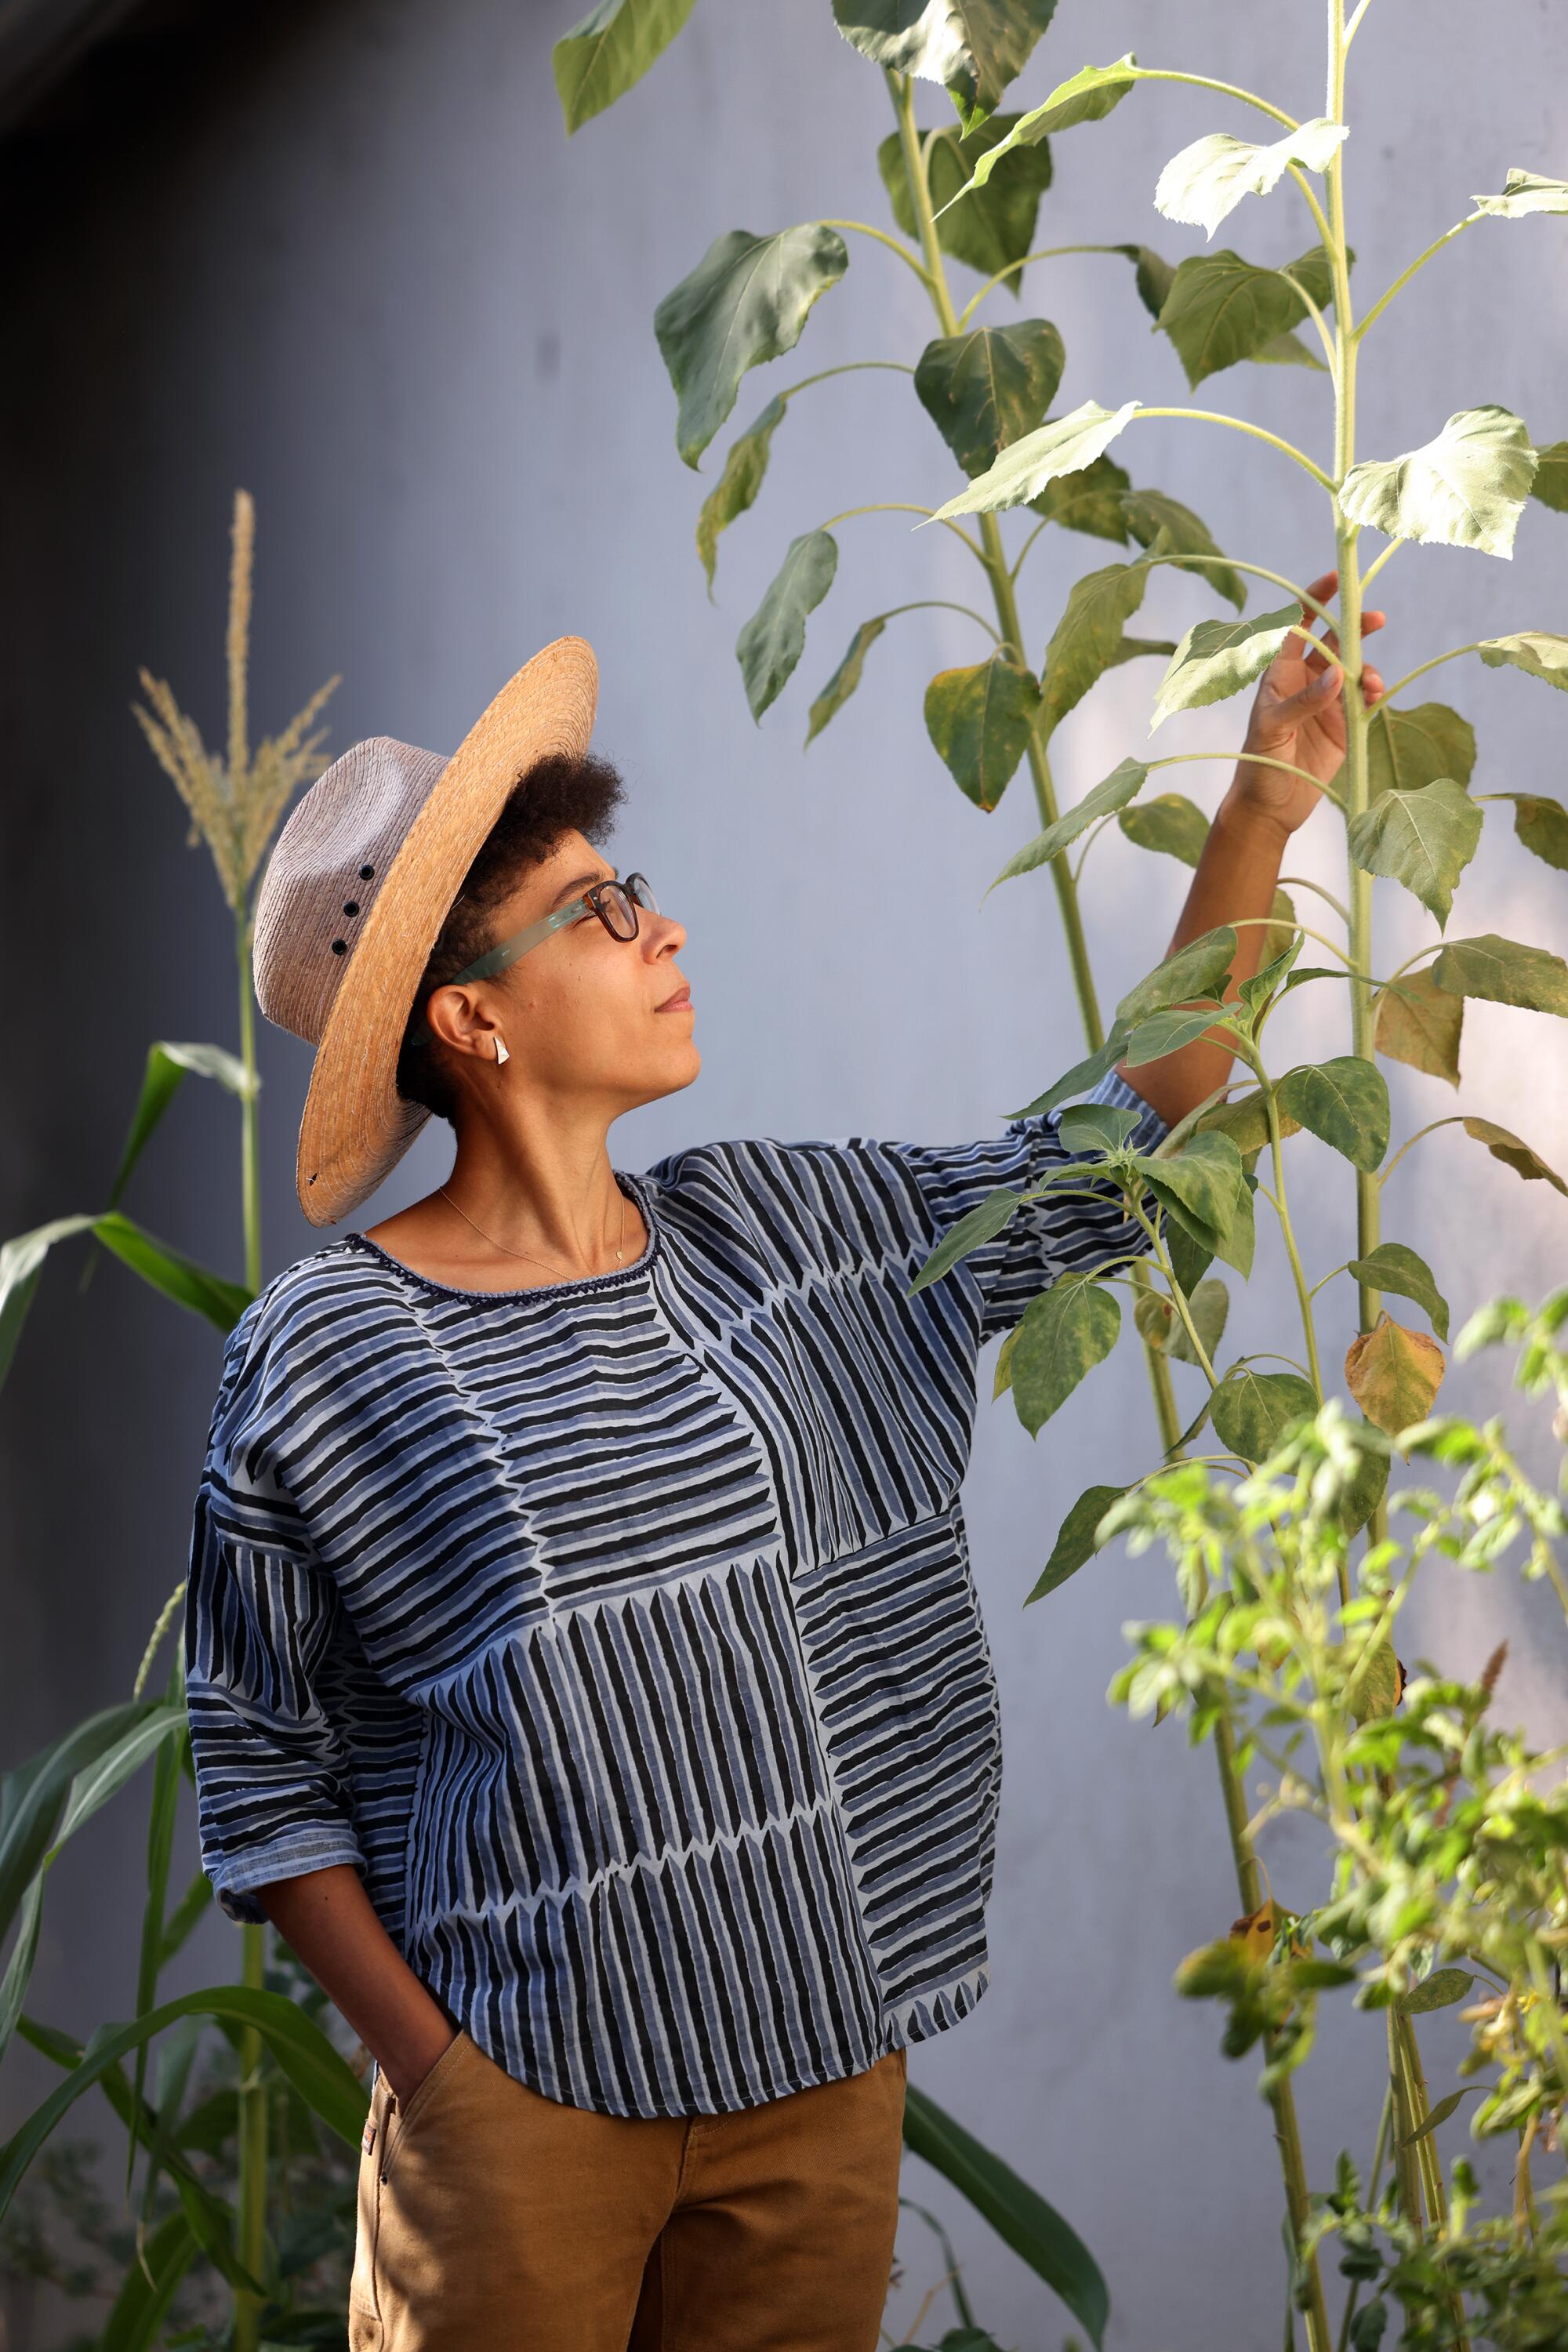 A woman wearing a straw hat stands next to tall plants.